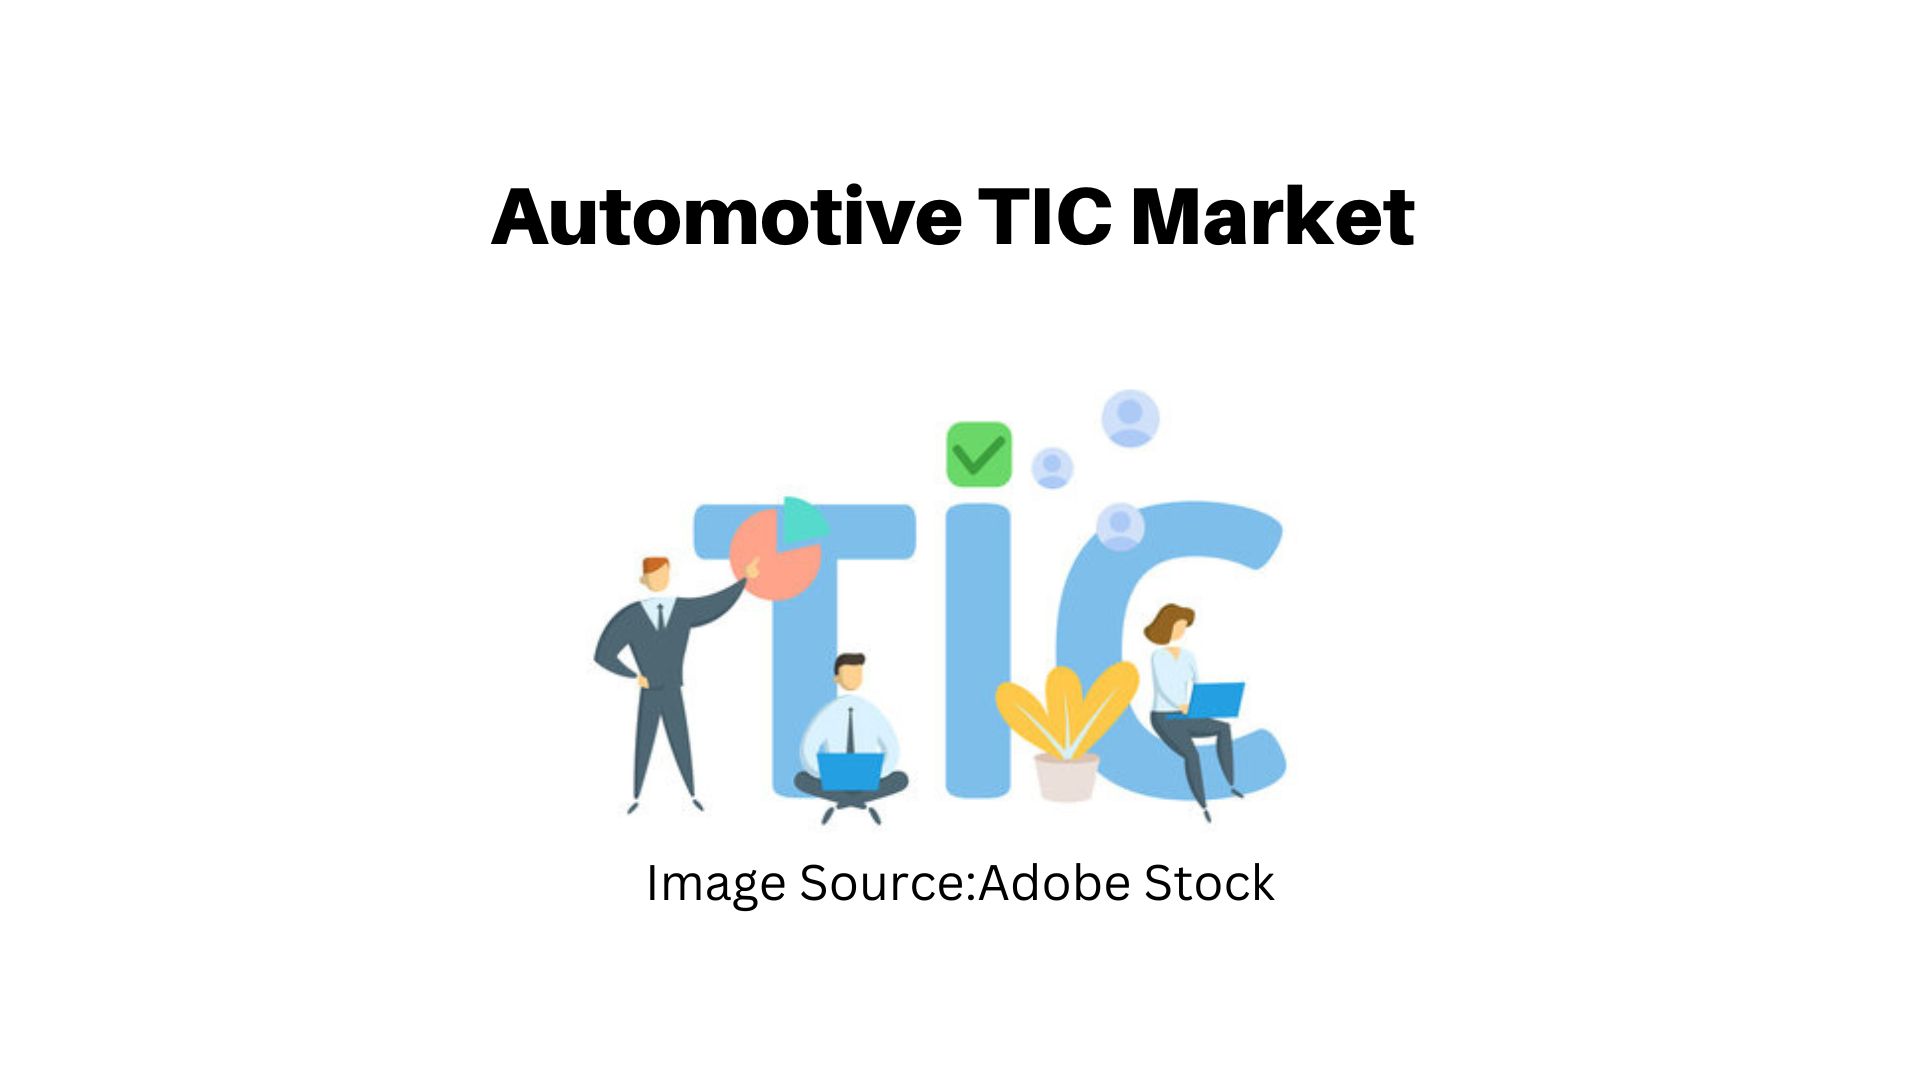 Global Automotive TIC Market Forecasted to reach USD 44.86 billion by 2032